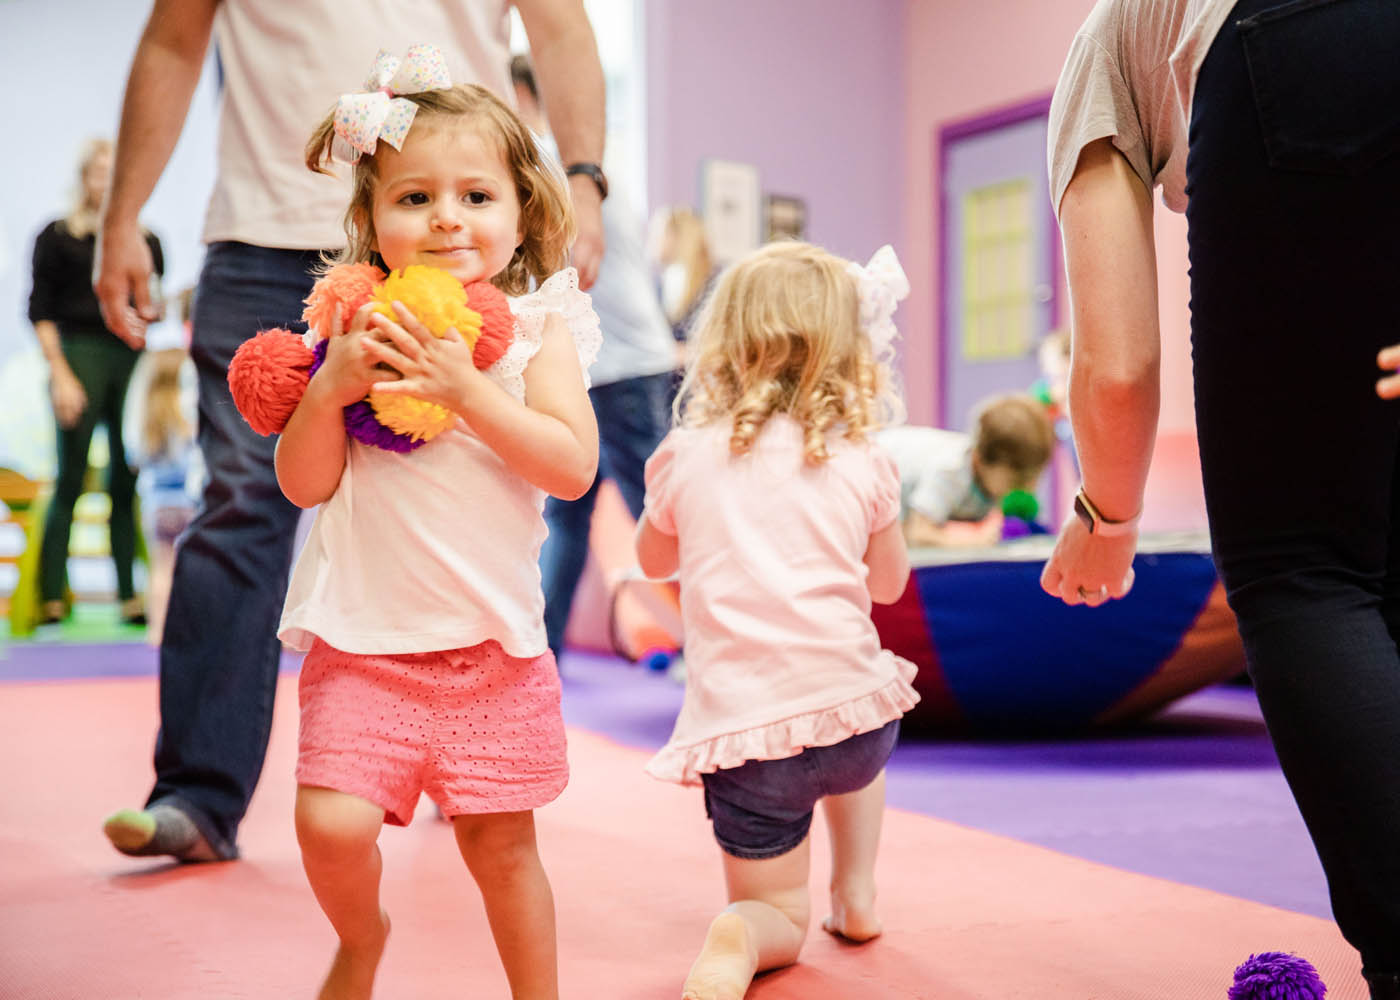 A little girl holding an armful of plush toys and having fun at a Romp n' Roll class.